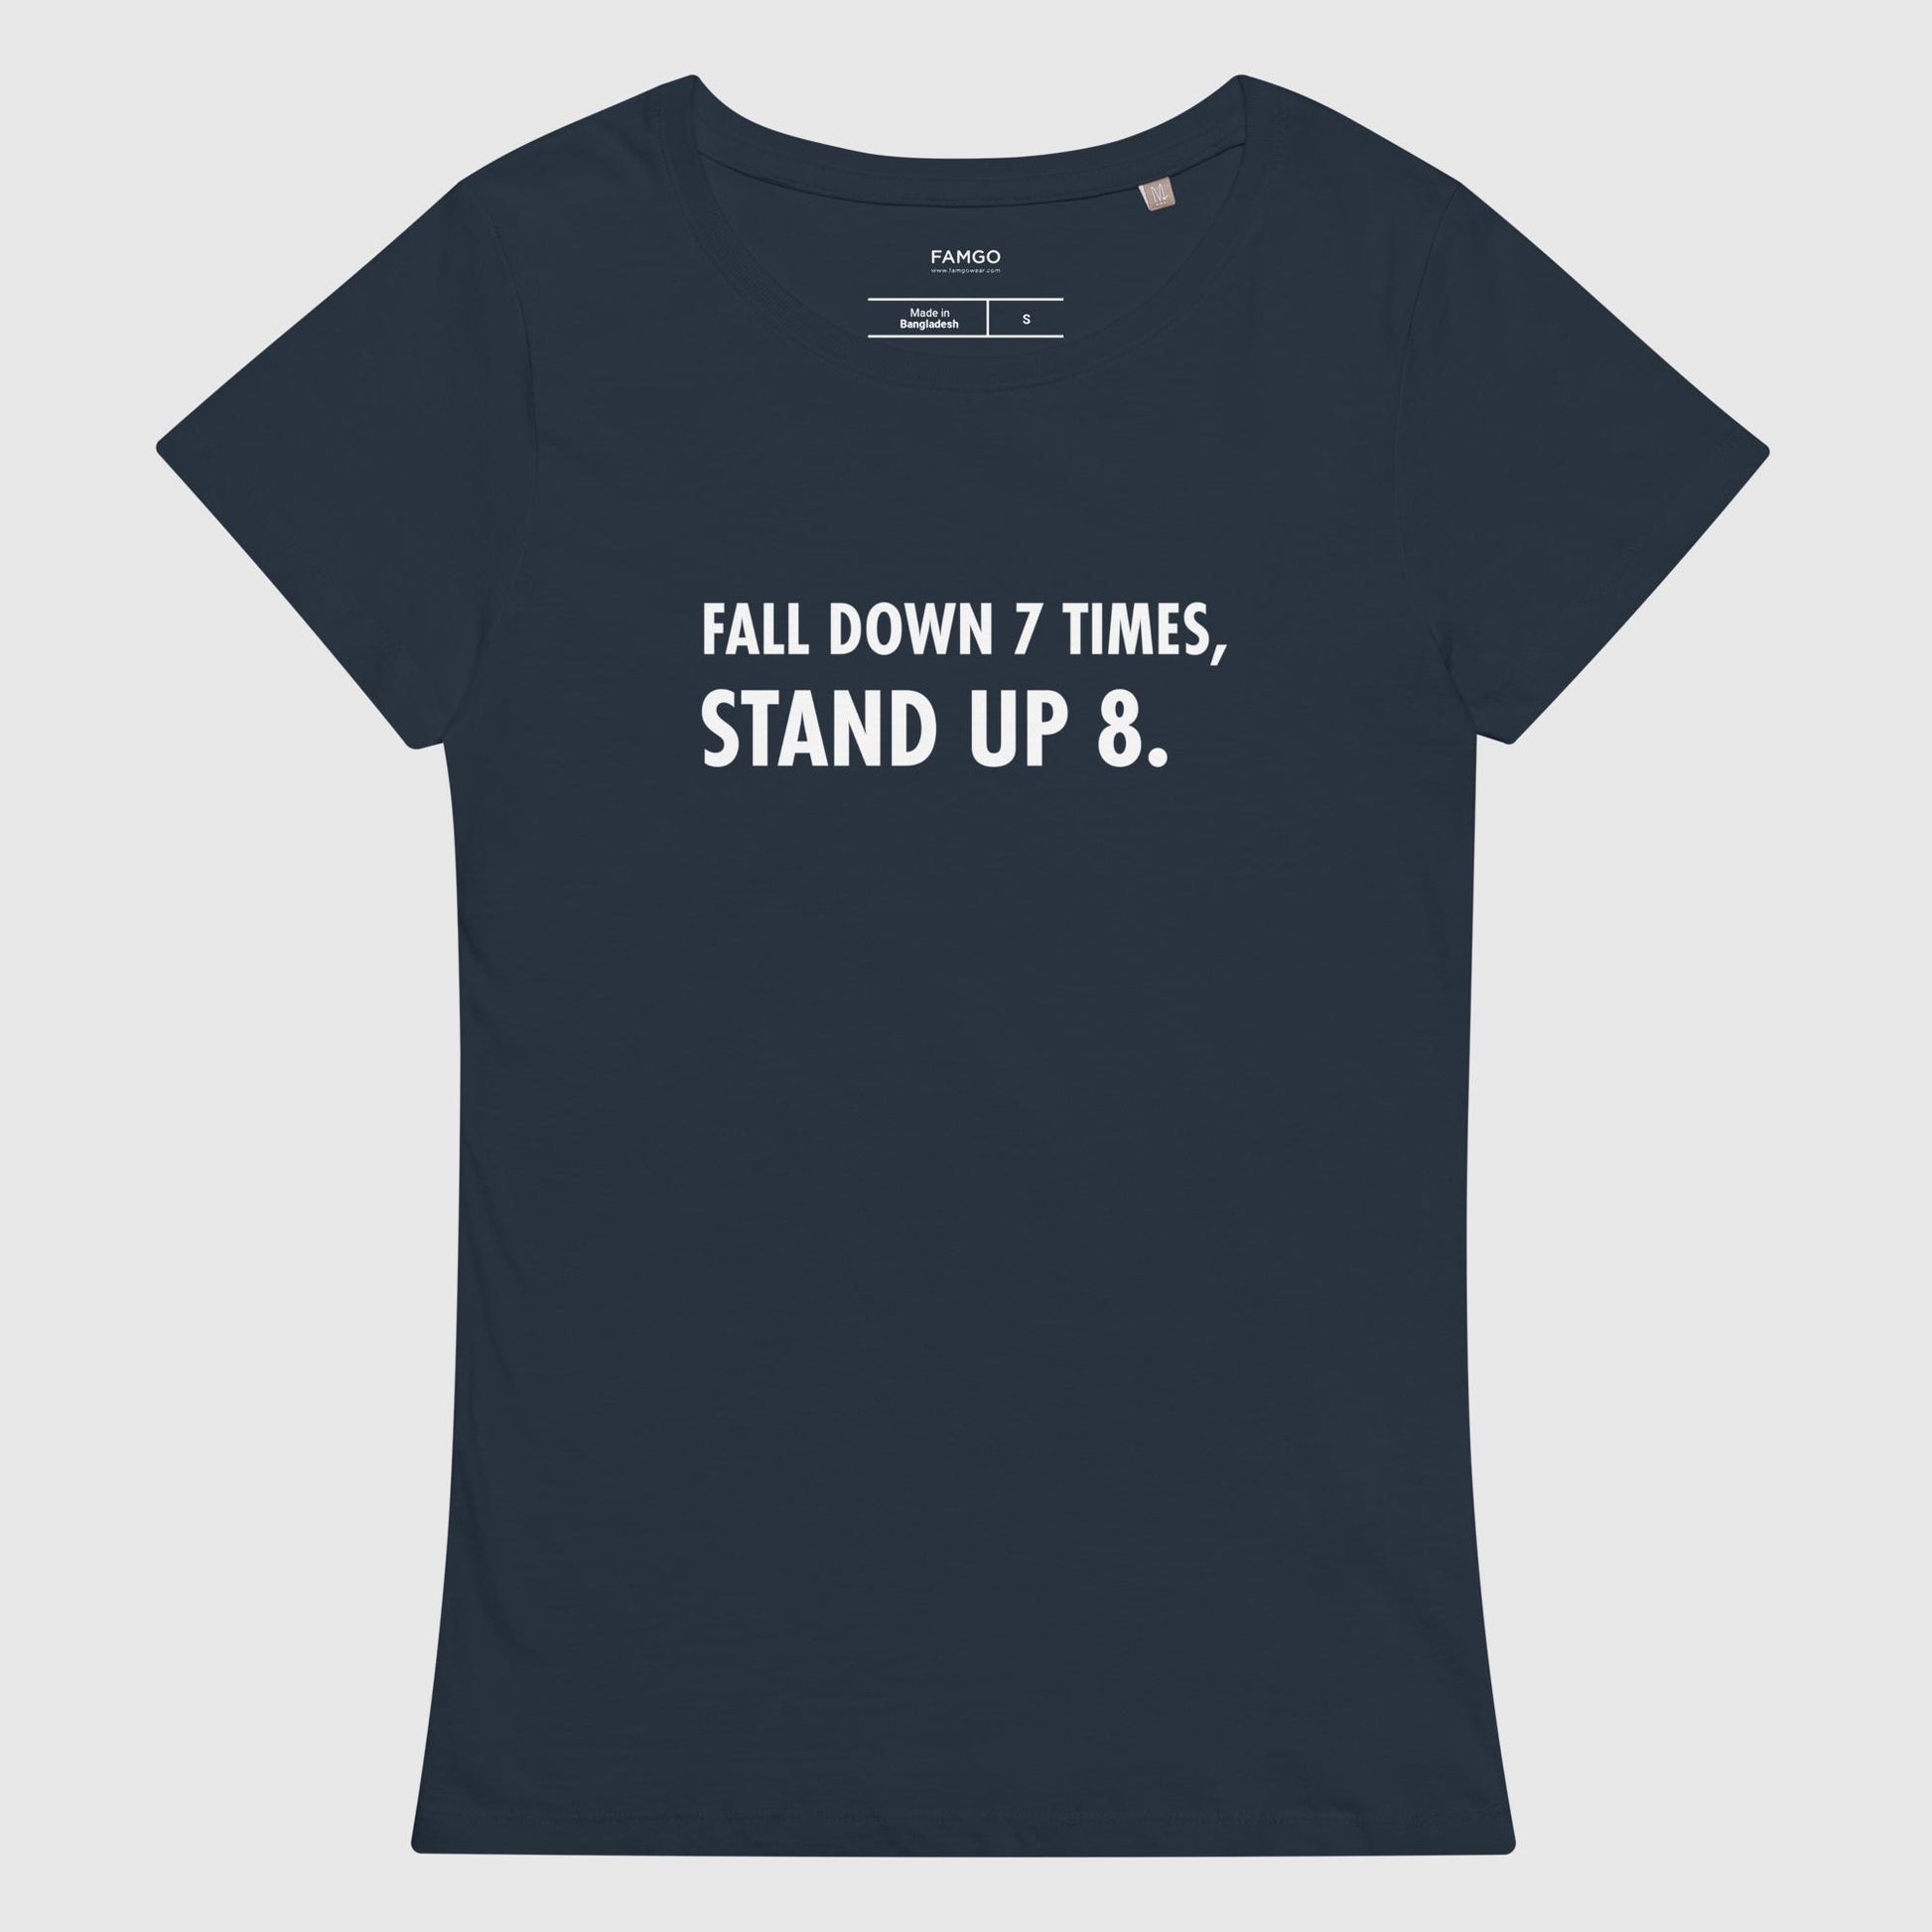 Women's navy organic cotton t-shirt that features the Japanese proverb, "Fall Down 7 Times, Stand Up 8."